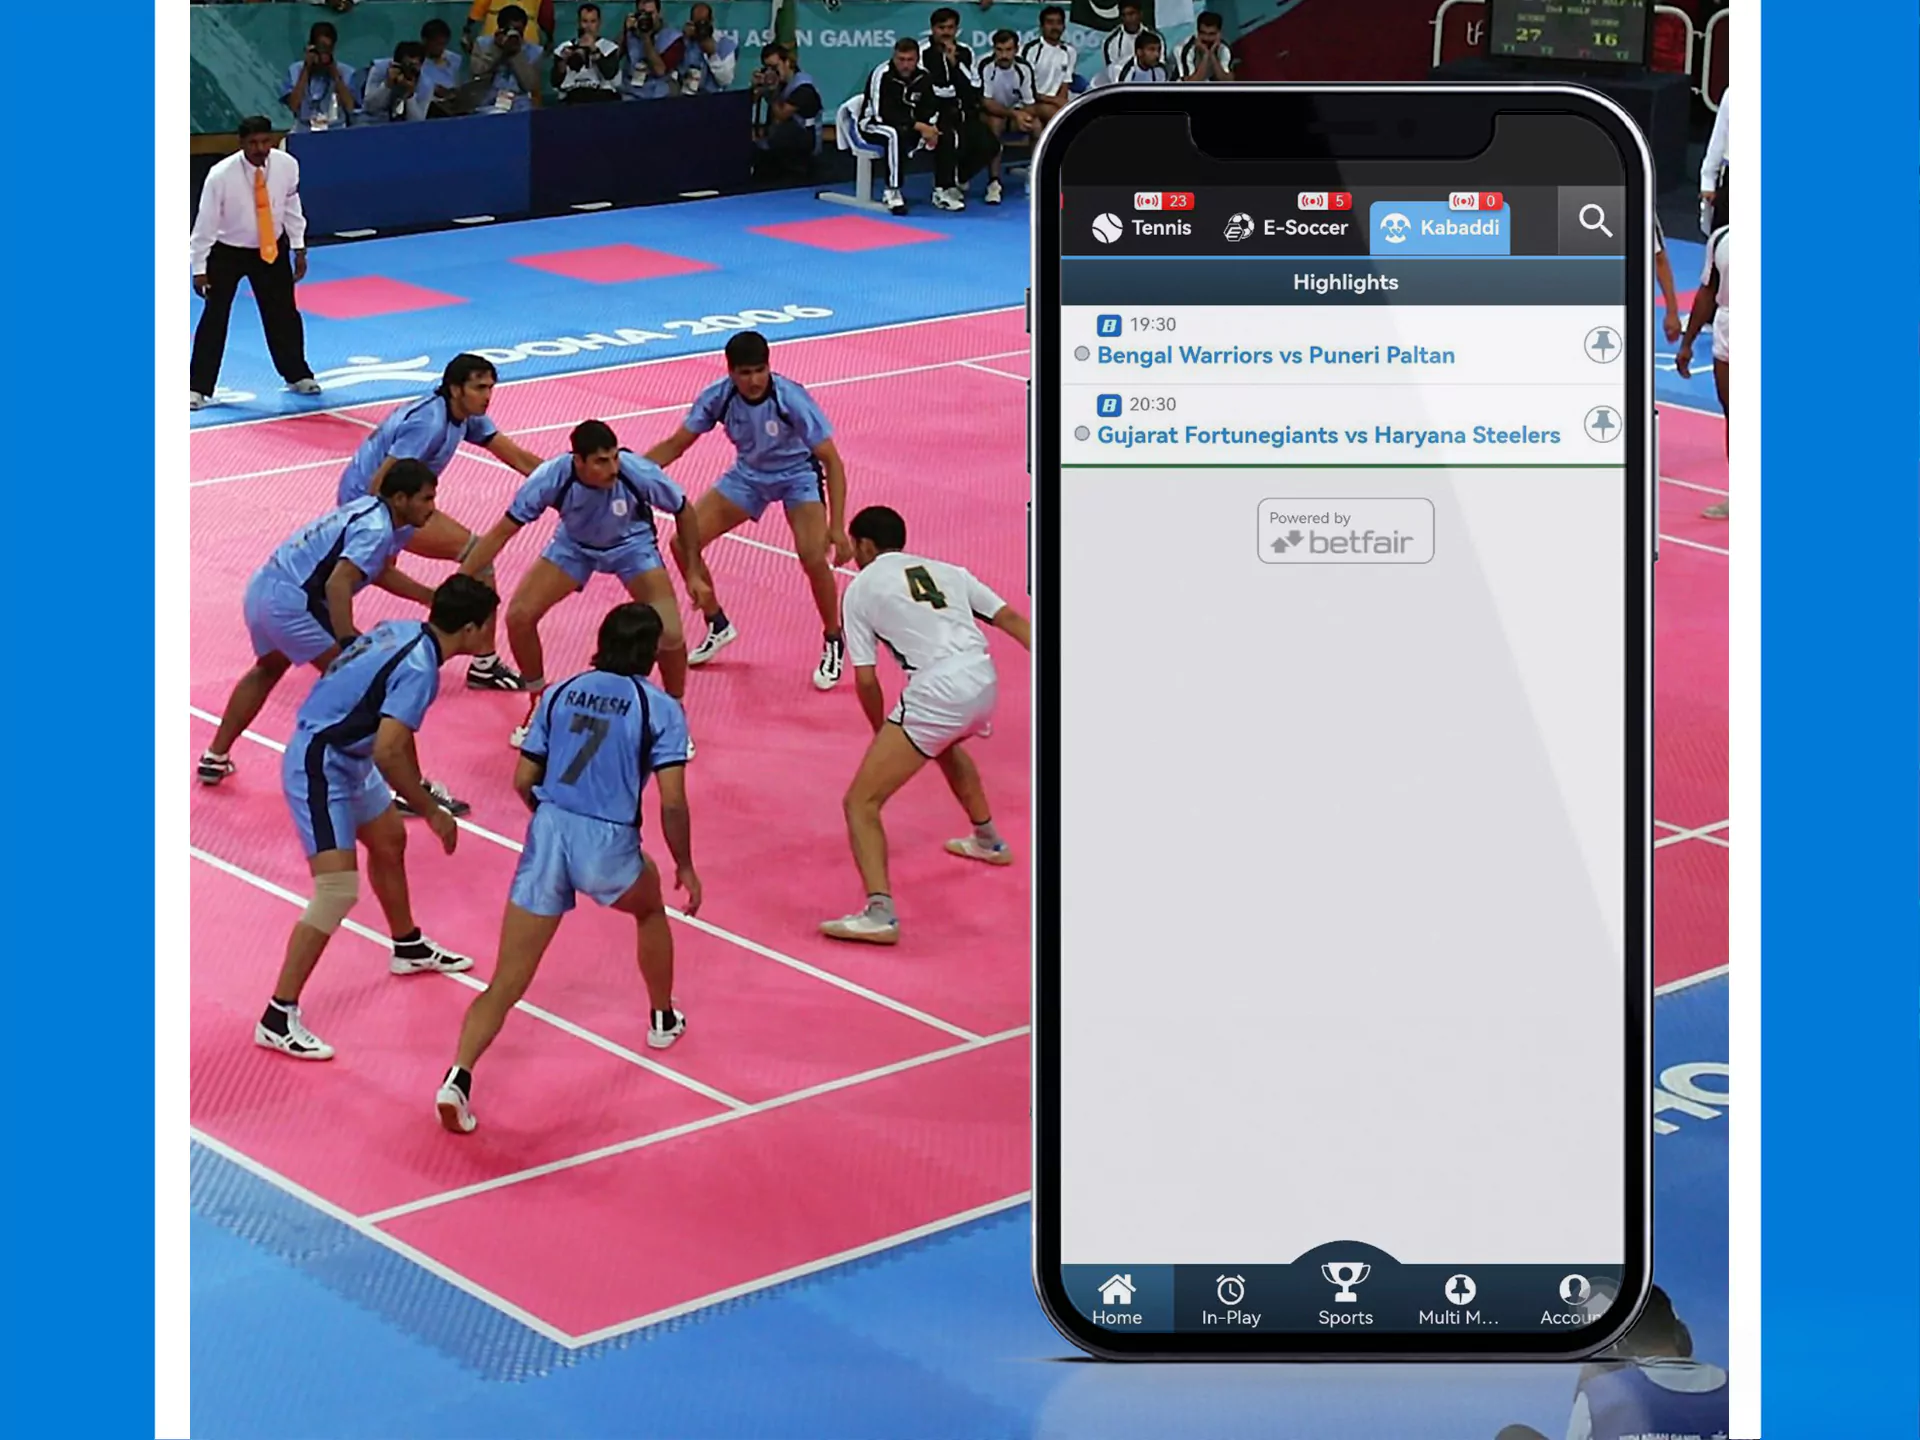 Install the Crickex app to place a bet on a kabaddi event from your mobile device.